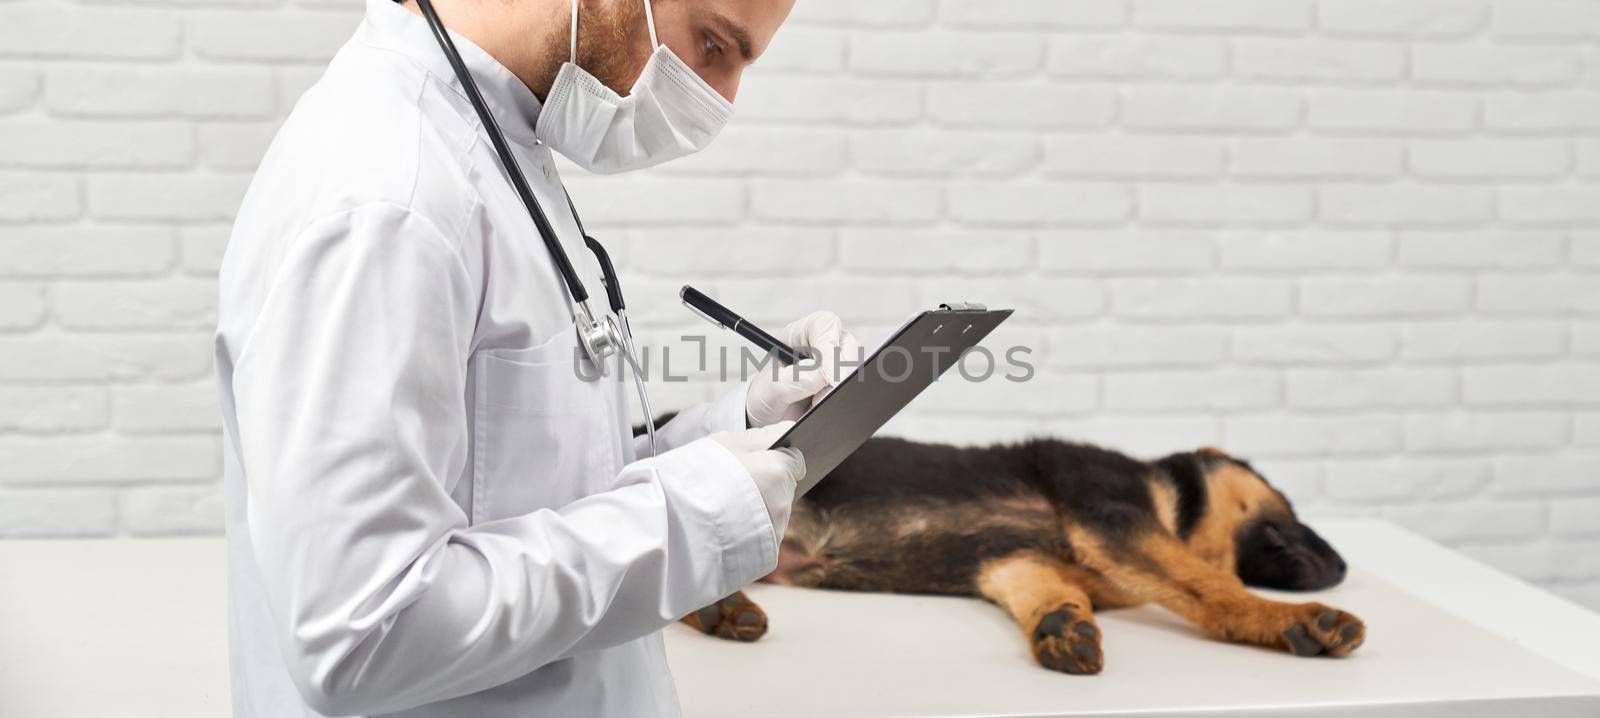 Side view of medical worker in lab coat mask and gloves noting results of pedigree dog examination. Crop of veterinarian with notes near table with sleeping dog. Concept of vet examination procedure.